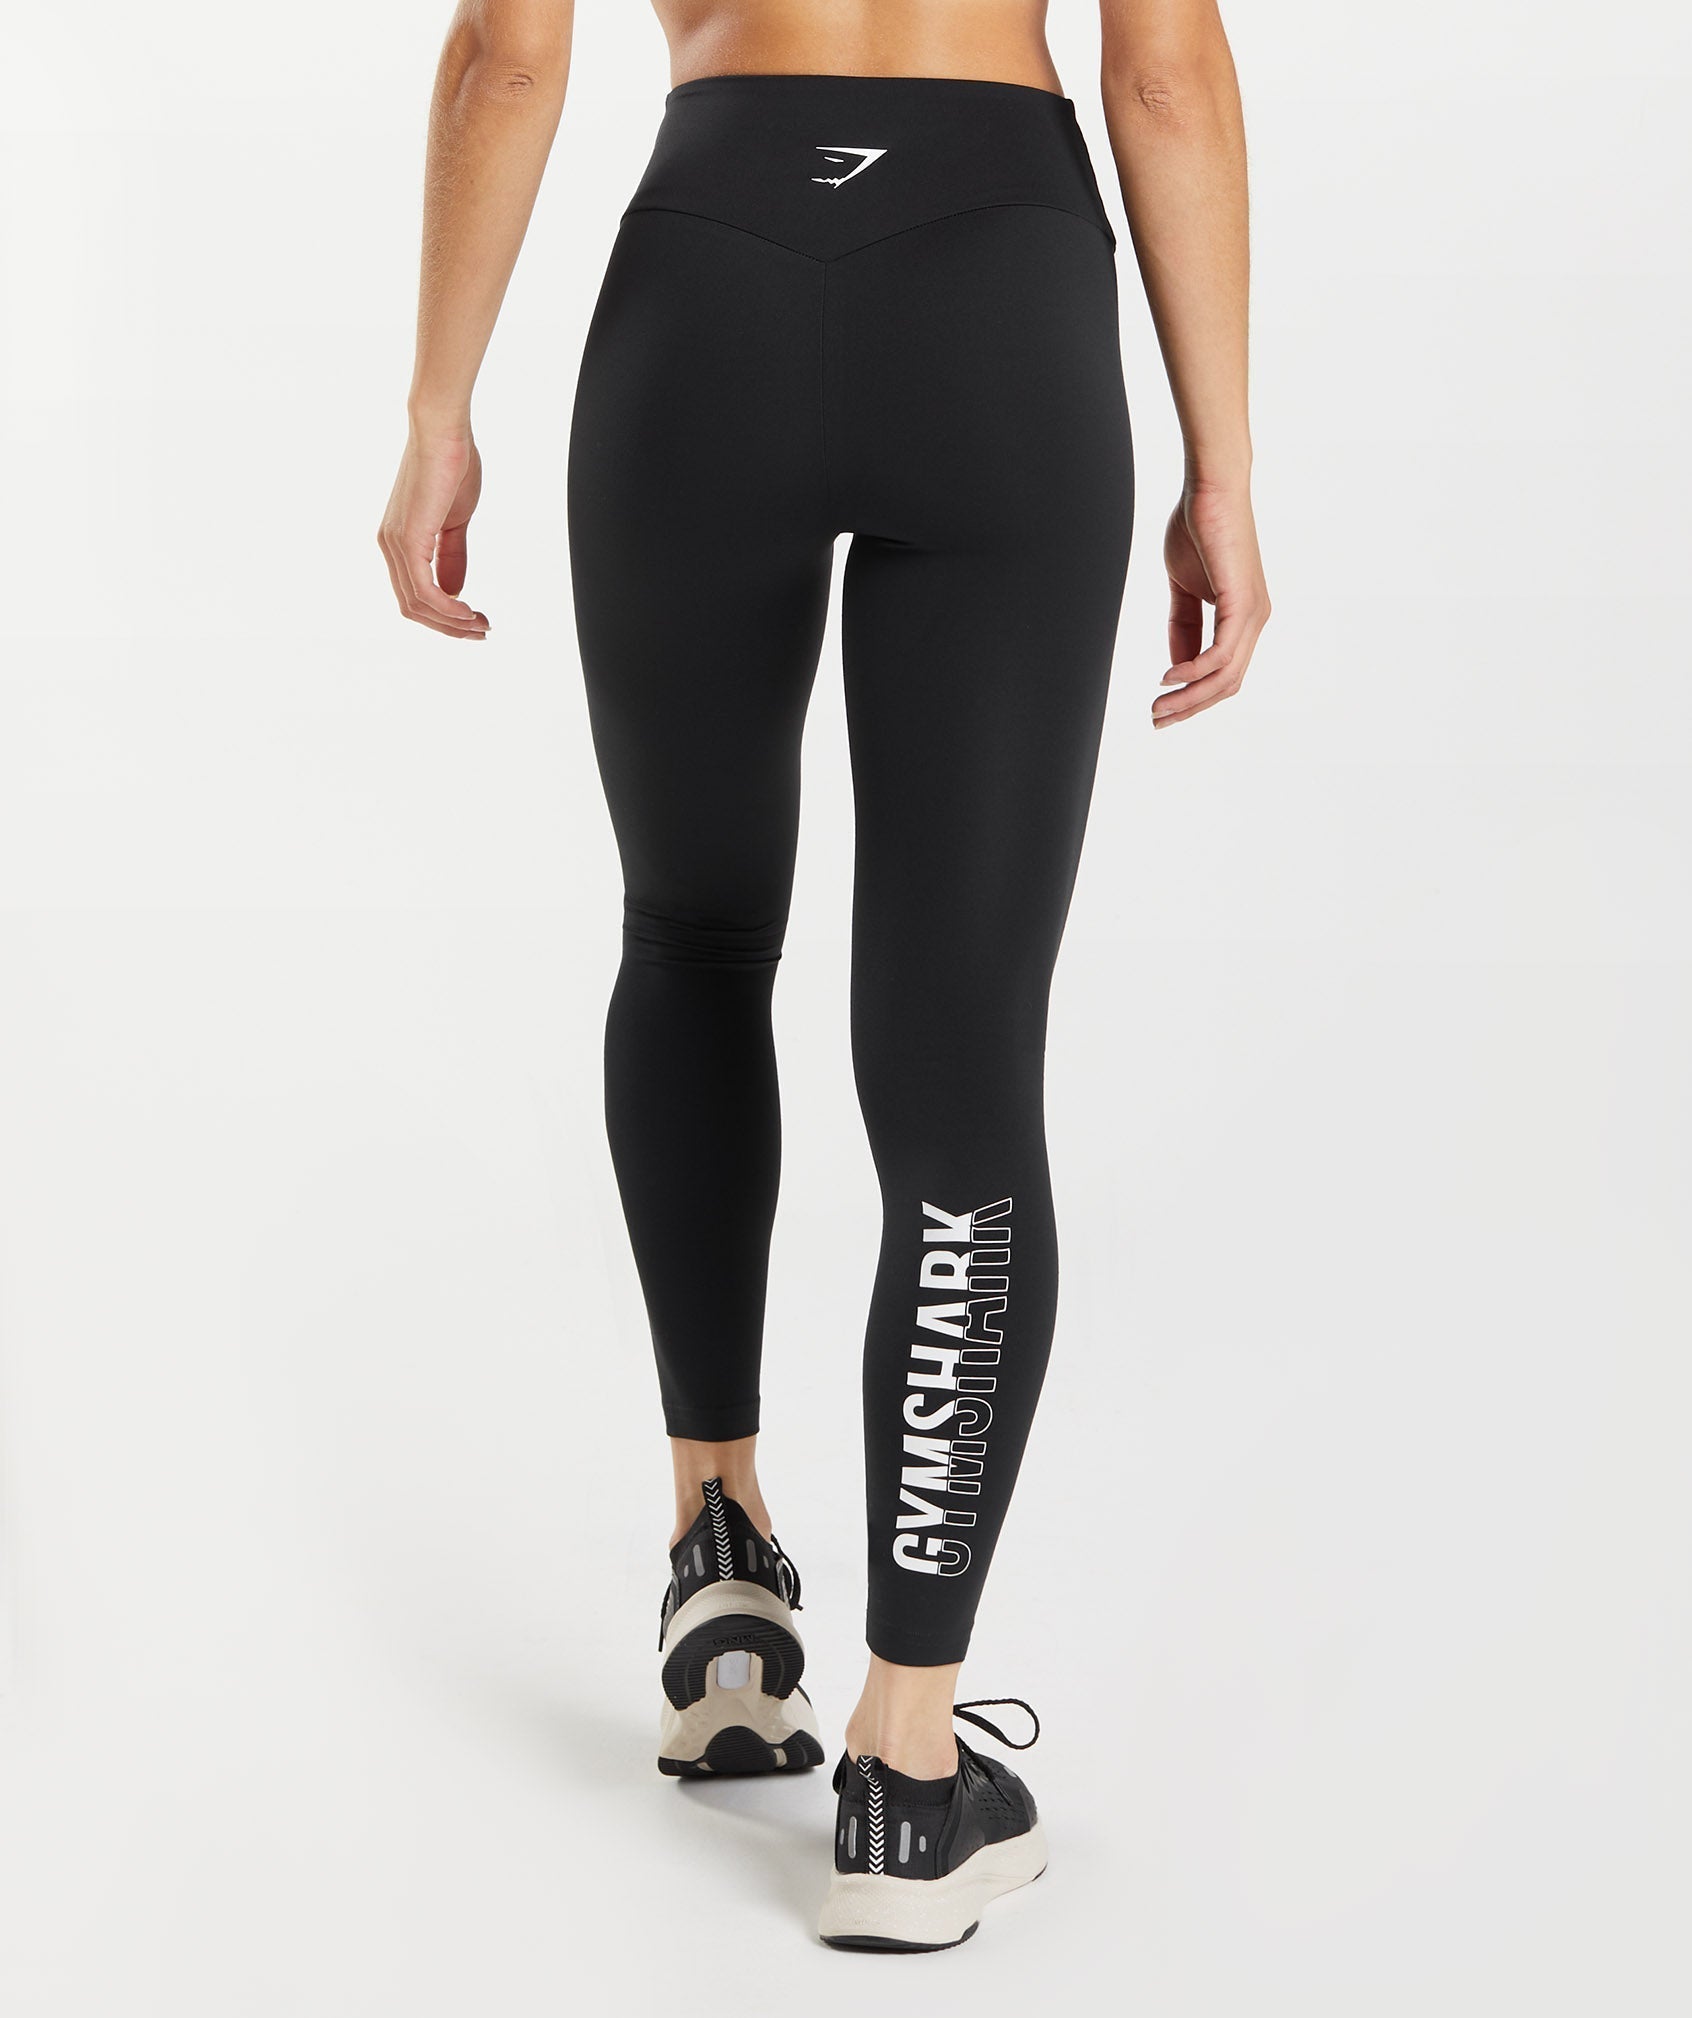 The Gymshark Fit Leggings are a simple design available in stylish